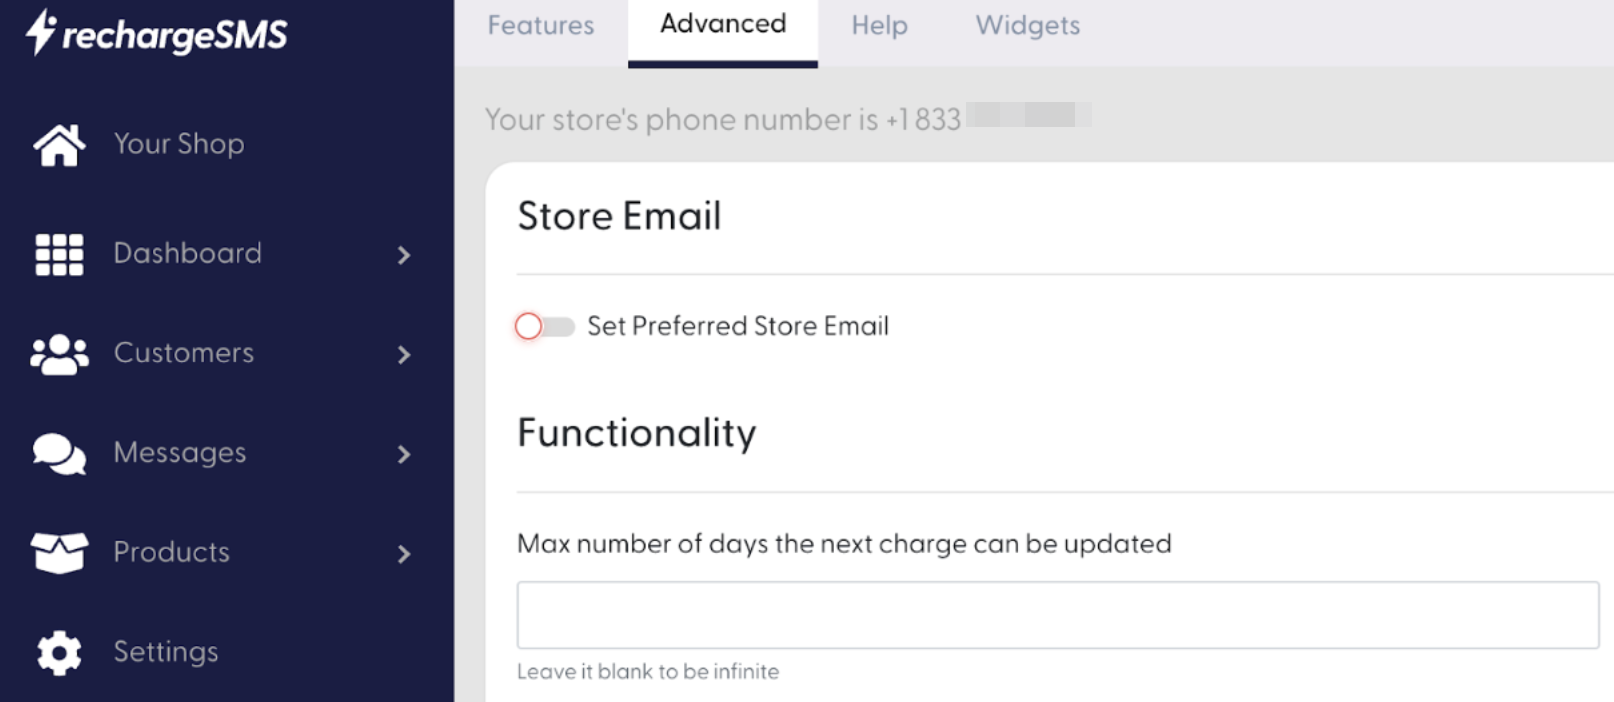 RechargeSMS settings page with store phone number